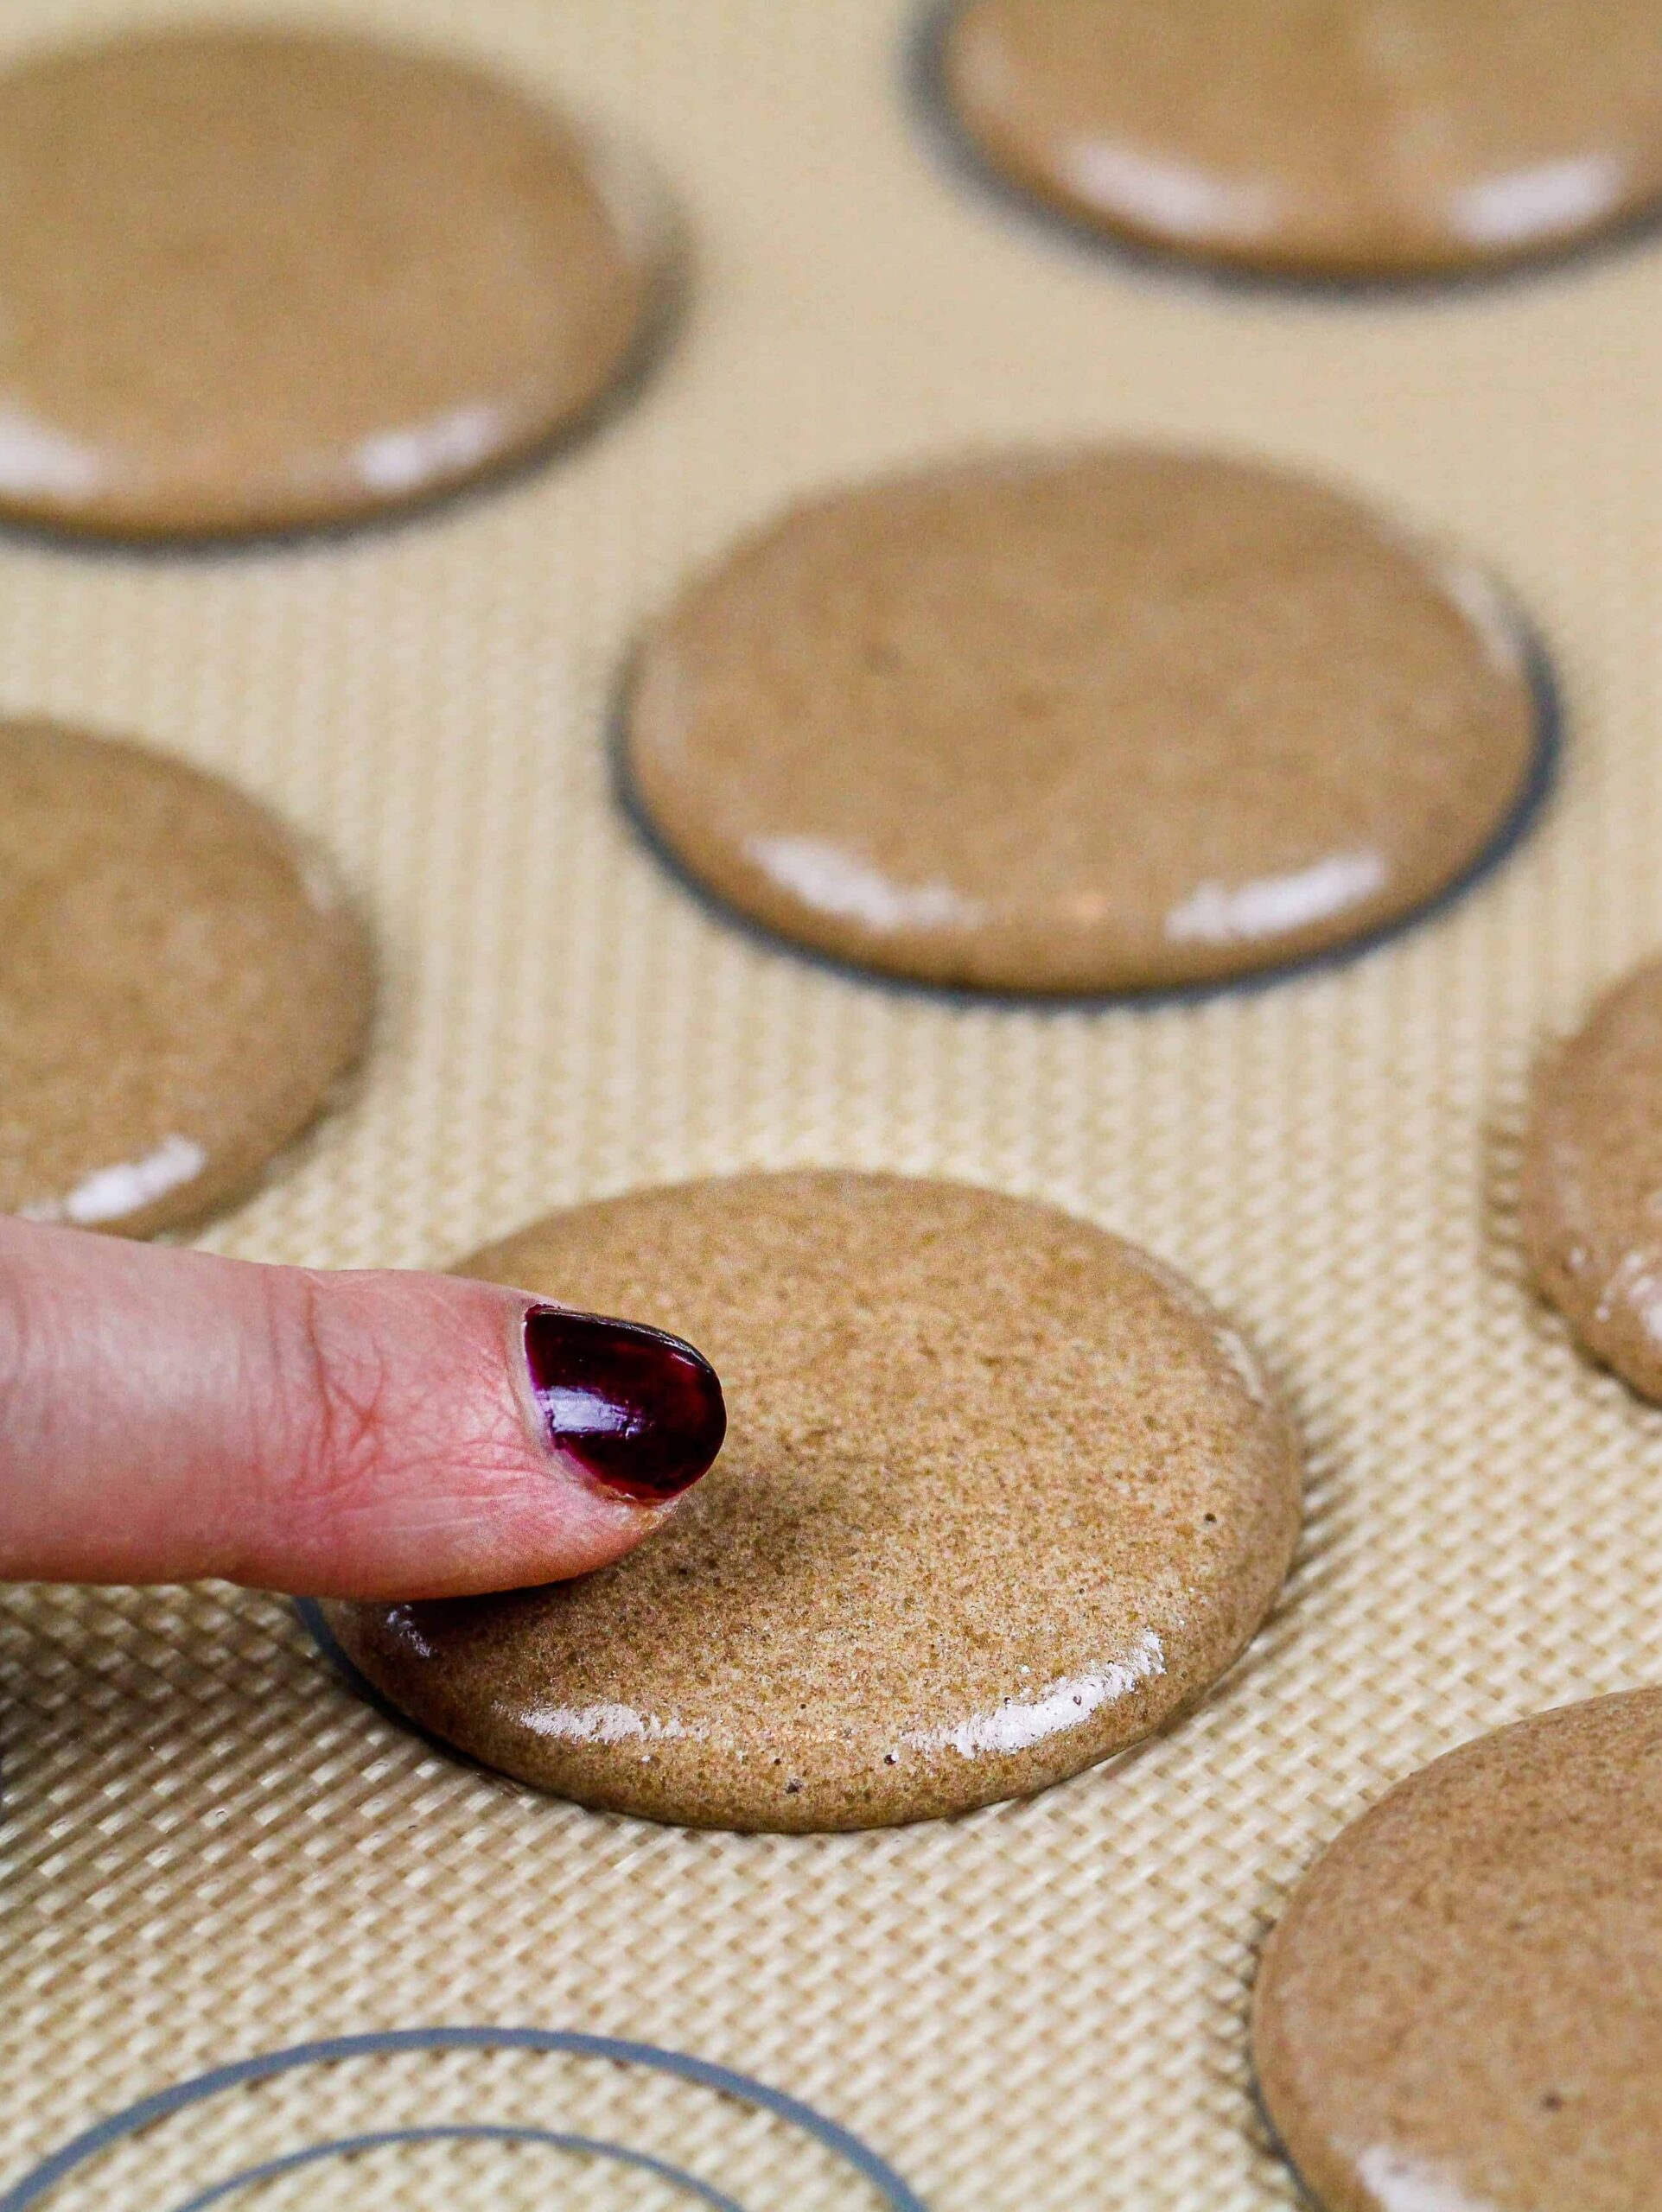 image of chocolate macarons piped on a silicon mat and resting to form a skin before being baked and made into Nutella macarons